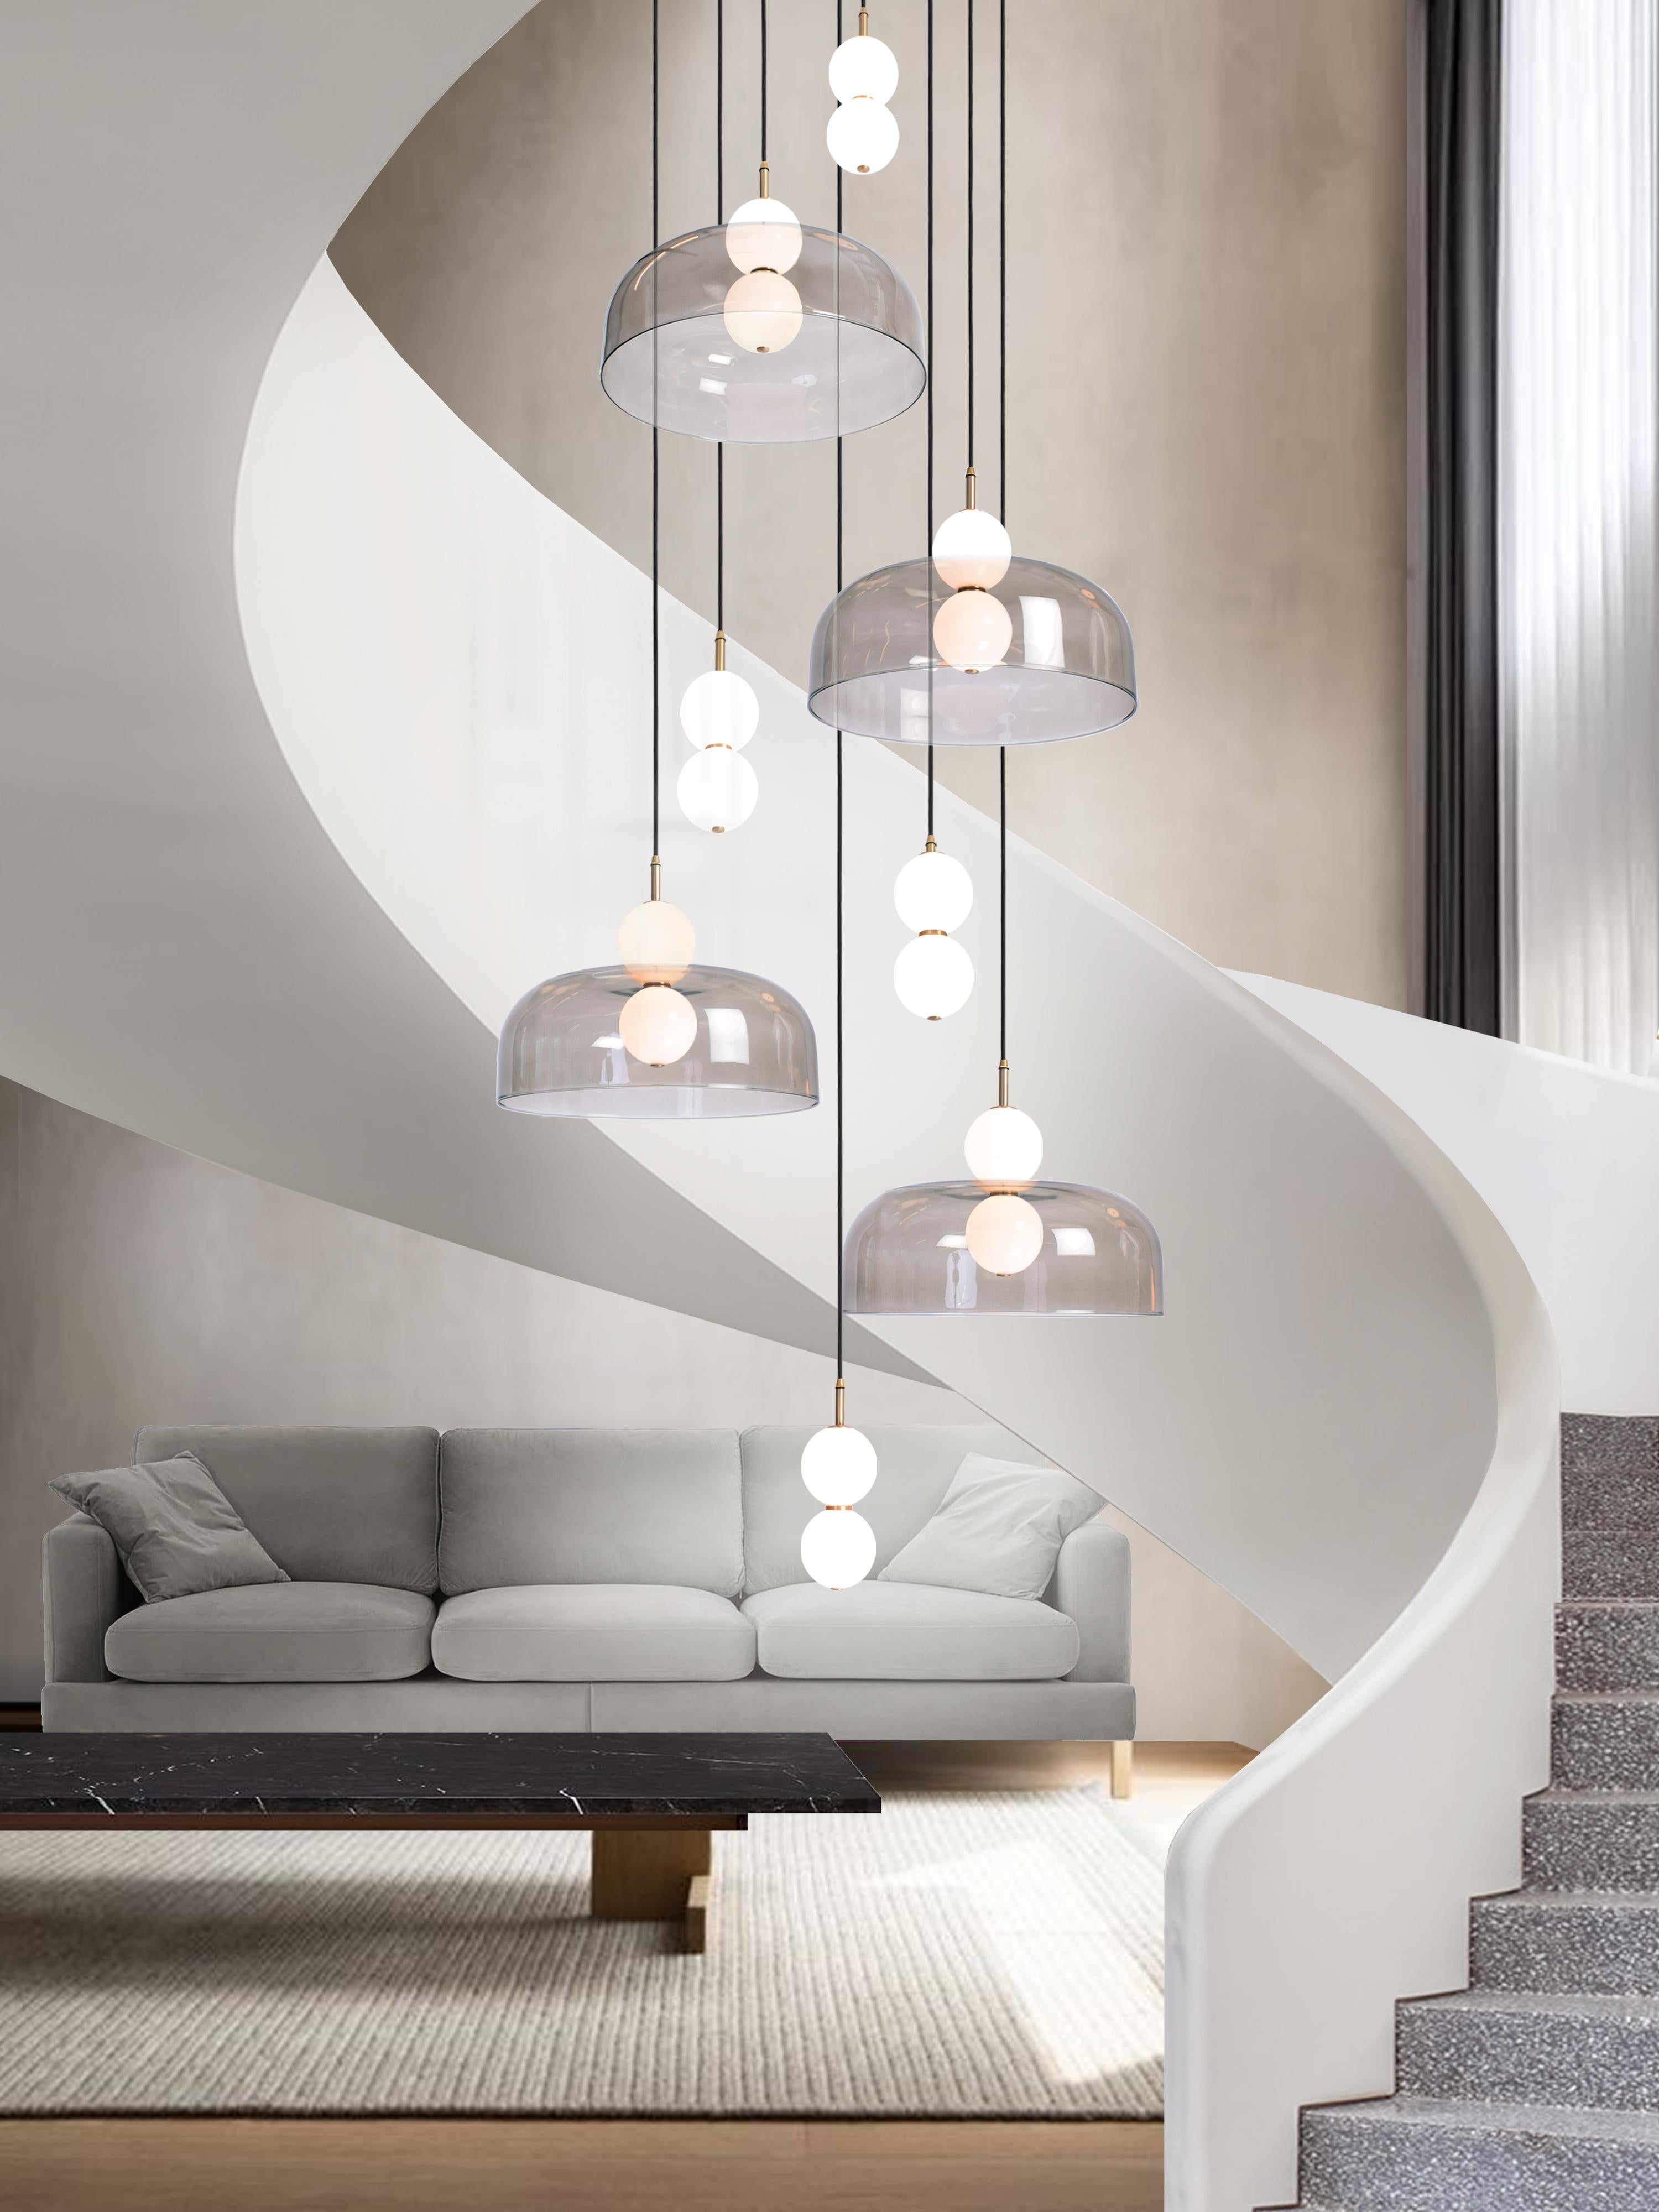 A hand spun shade suspended between white glass orbs, creating an echoed glow of light via the illusion of mirrored reflections.

Designed to be both functional and sculptural the Echo collection incorporates two pendant variations; lamp and